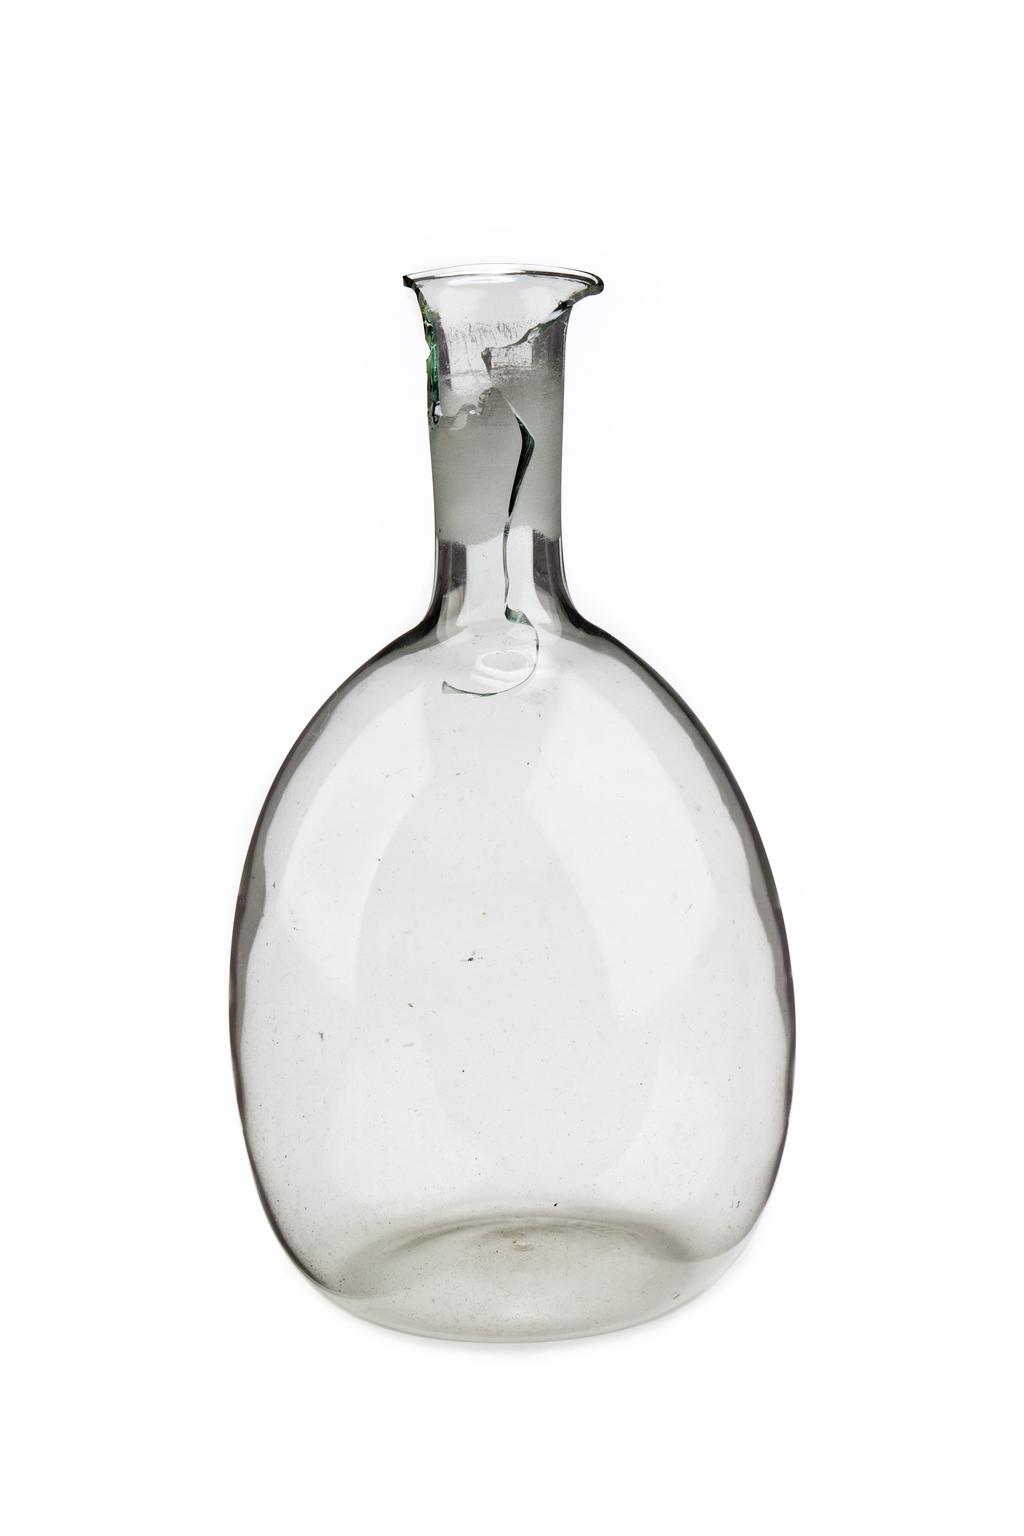 A scientific flask, with a crack in the neck of it